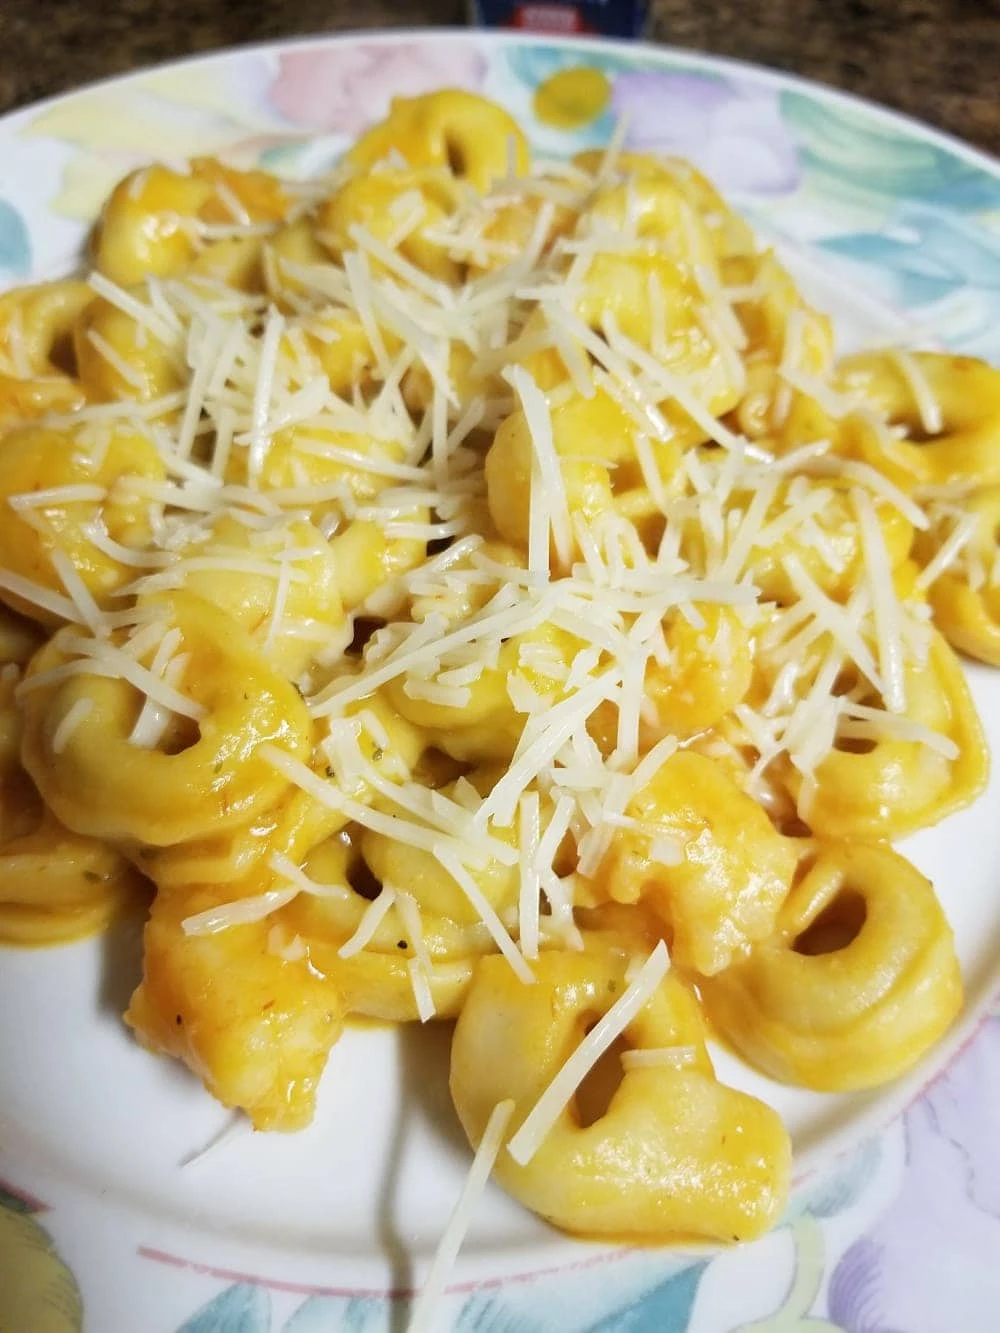 Shrimp and Tortellini with Butternut Squash Sauce - Delicious and fast dinner 2